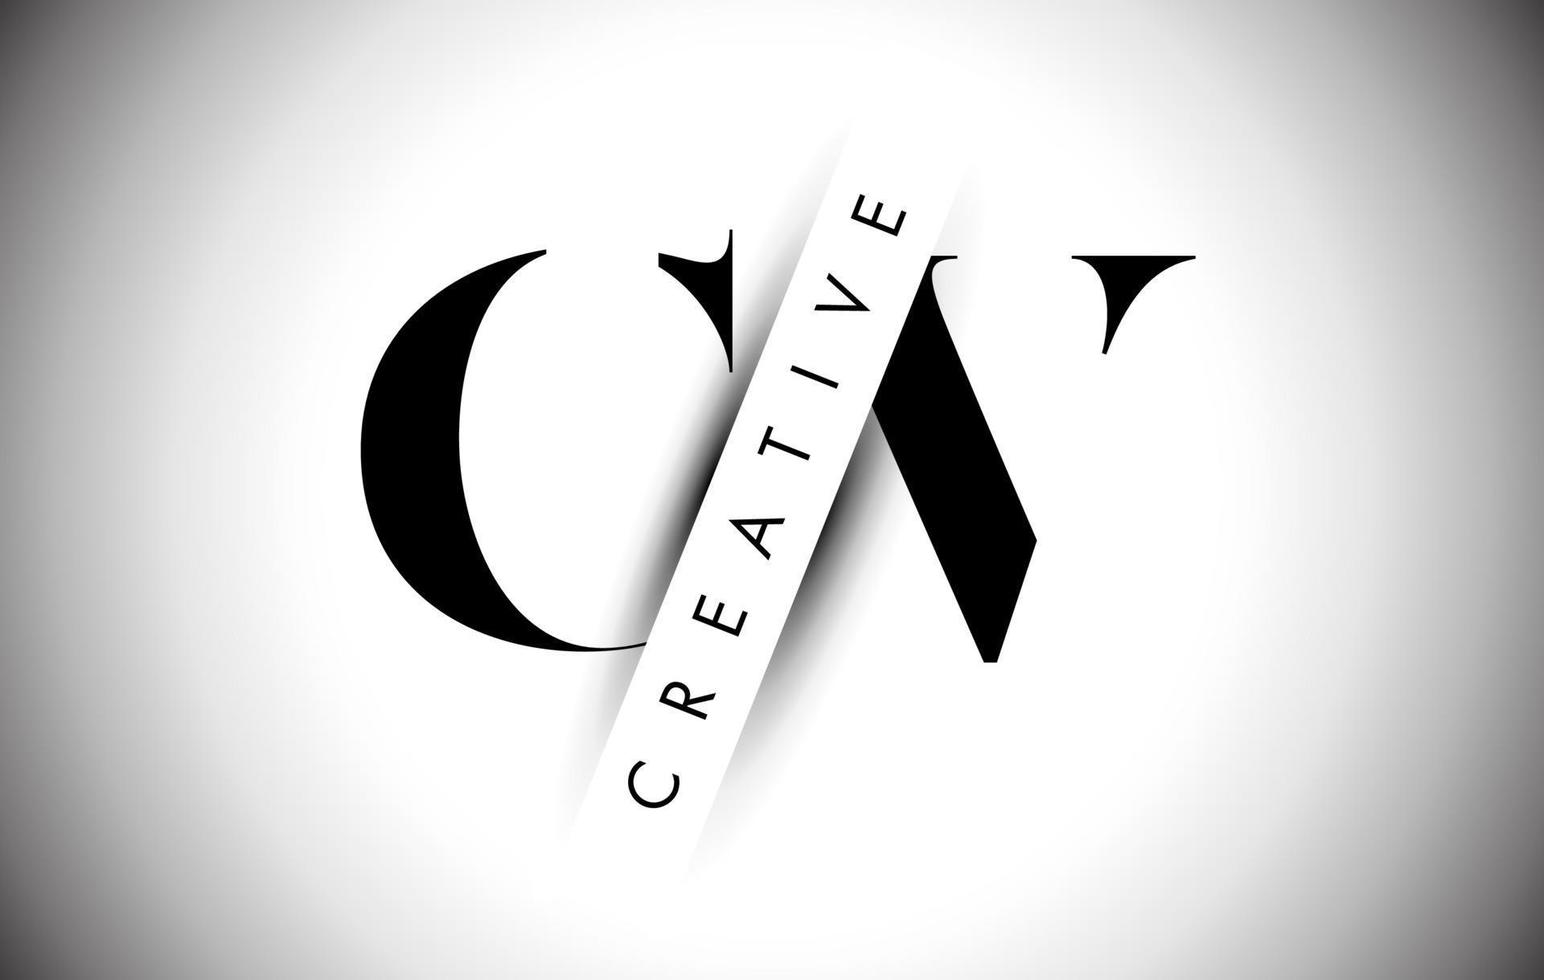 CV C V Letter Logo with Creative Shadow Cut and Overlayered Text Design. vector